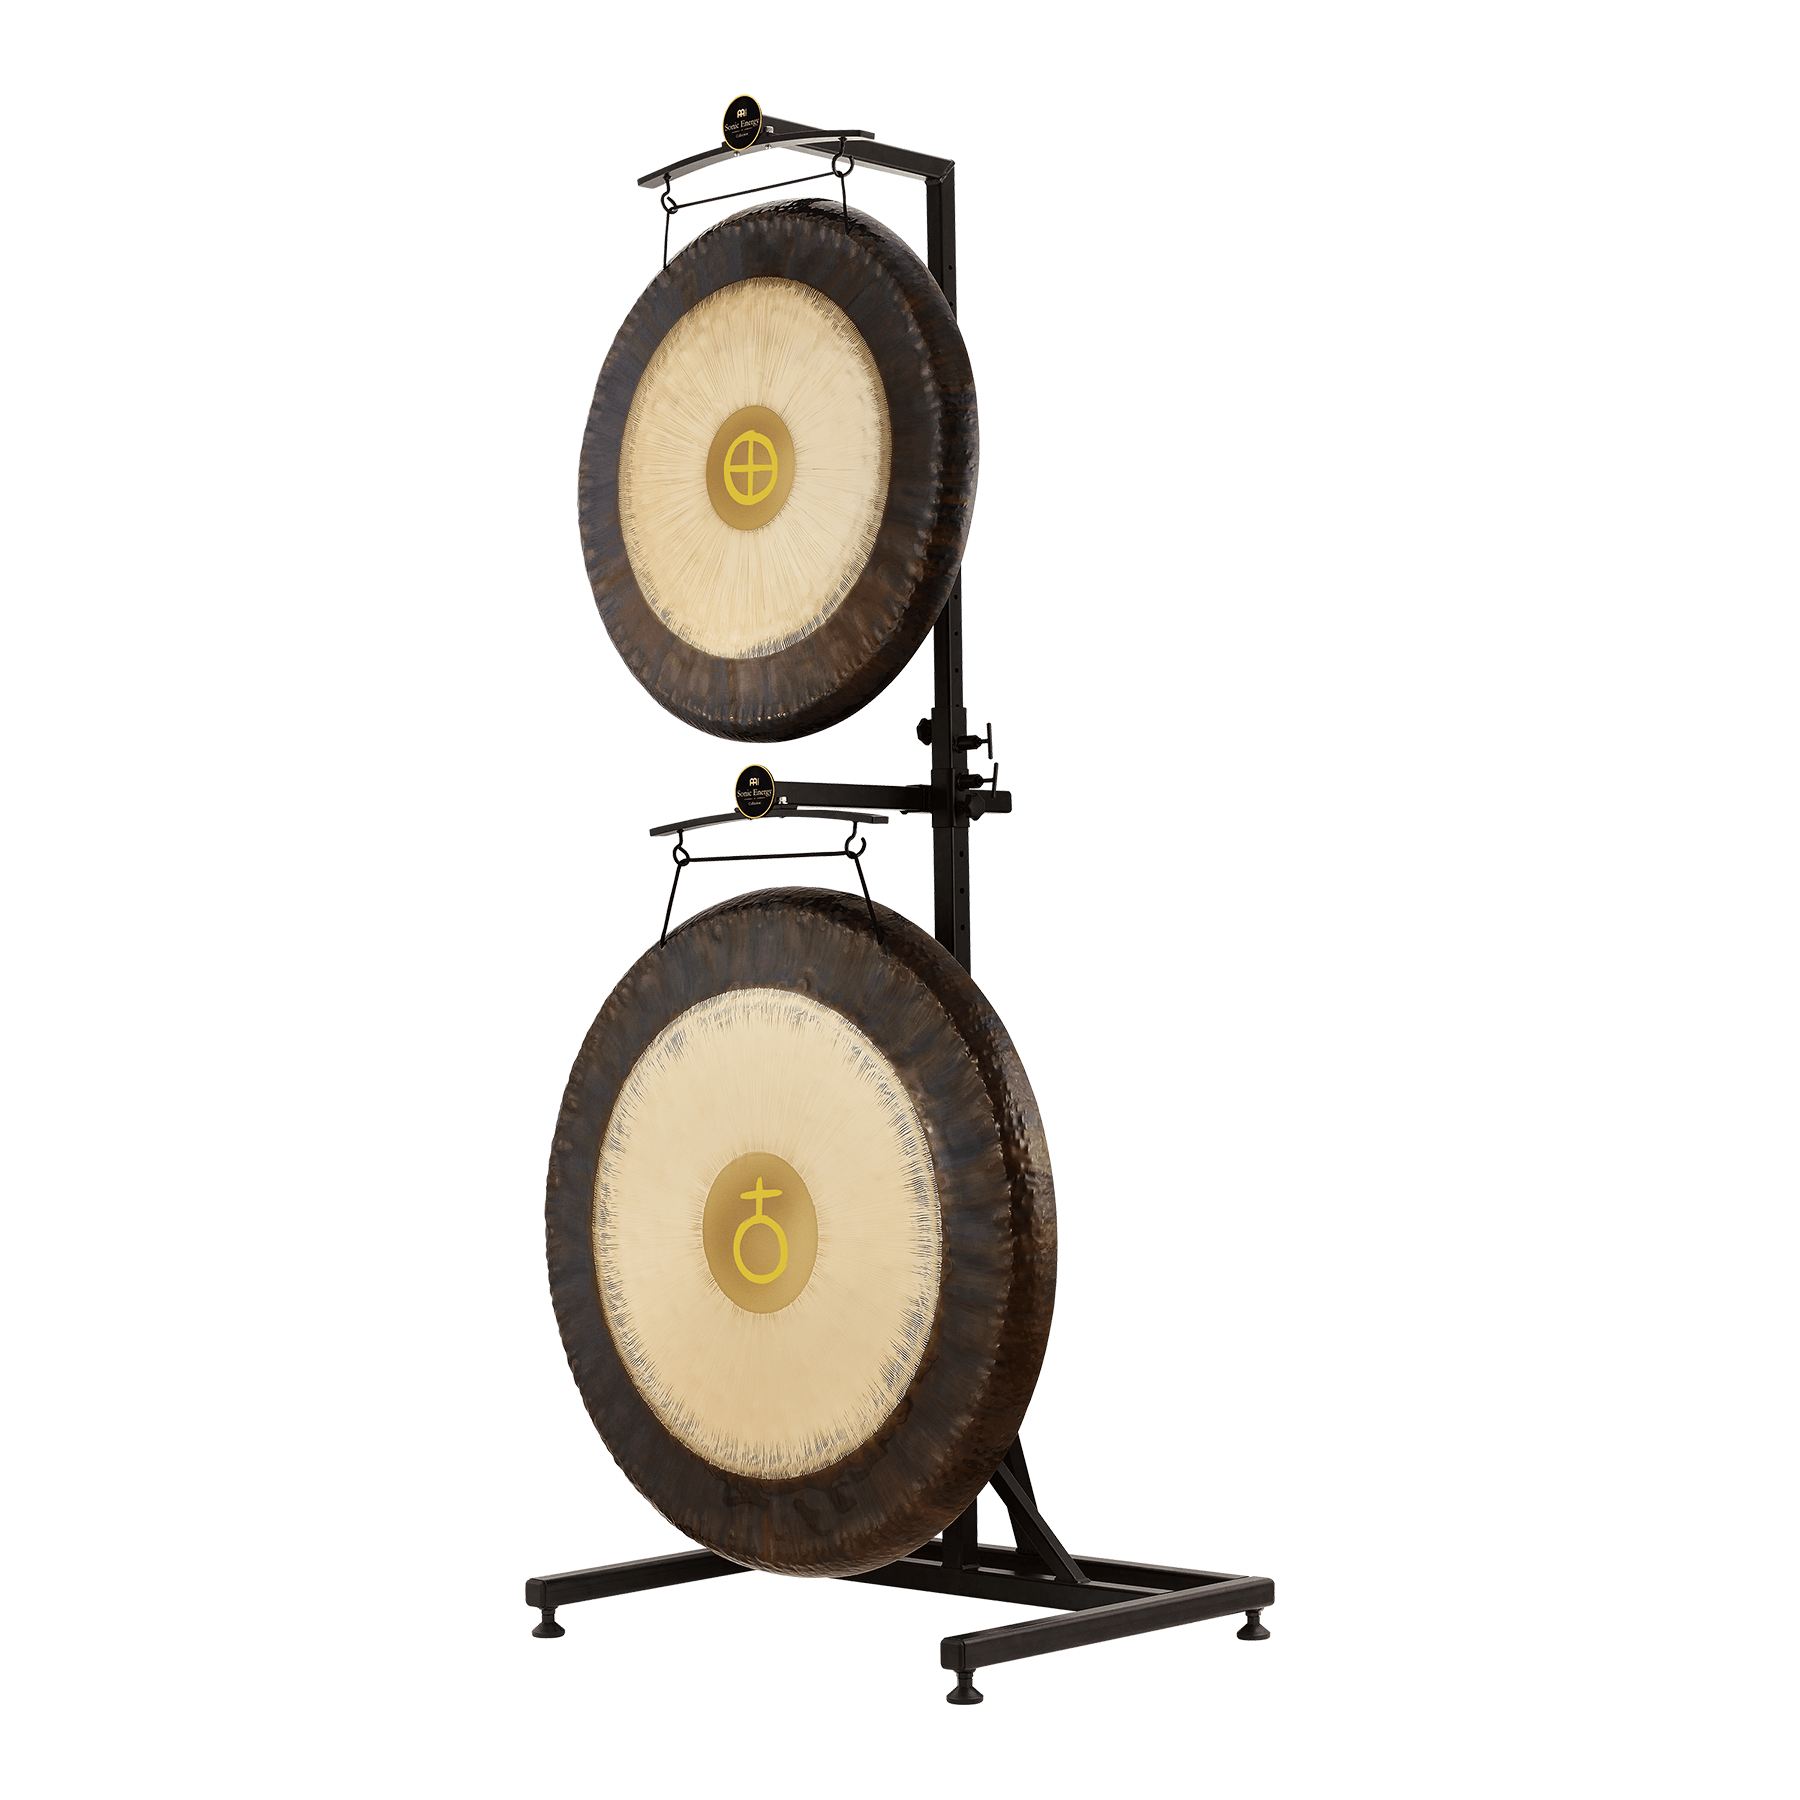 Pro Gong Vertical Stand Up To 40" Gong Size - Pro Gong / Tam Tam Stand